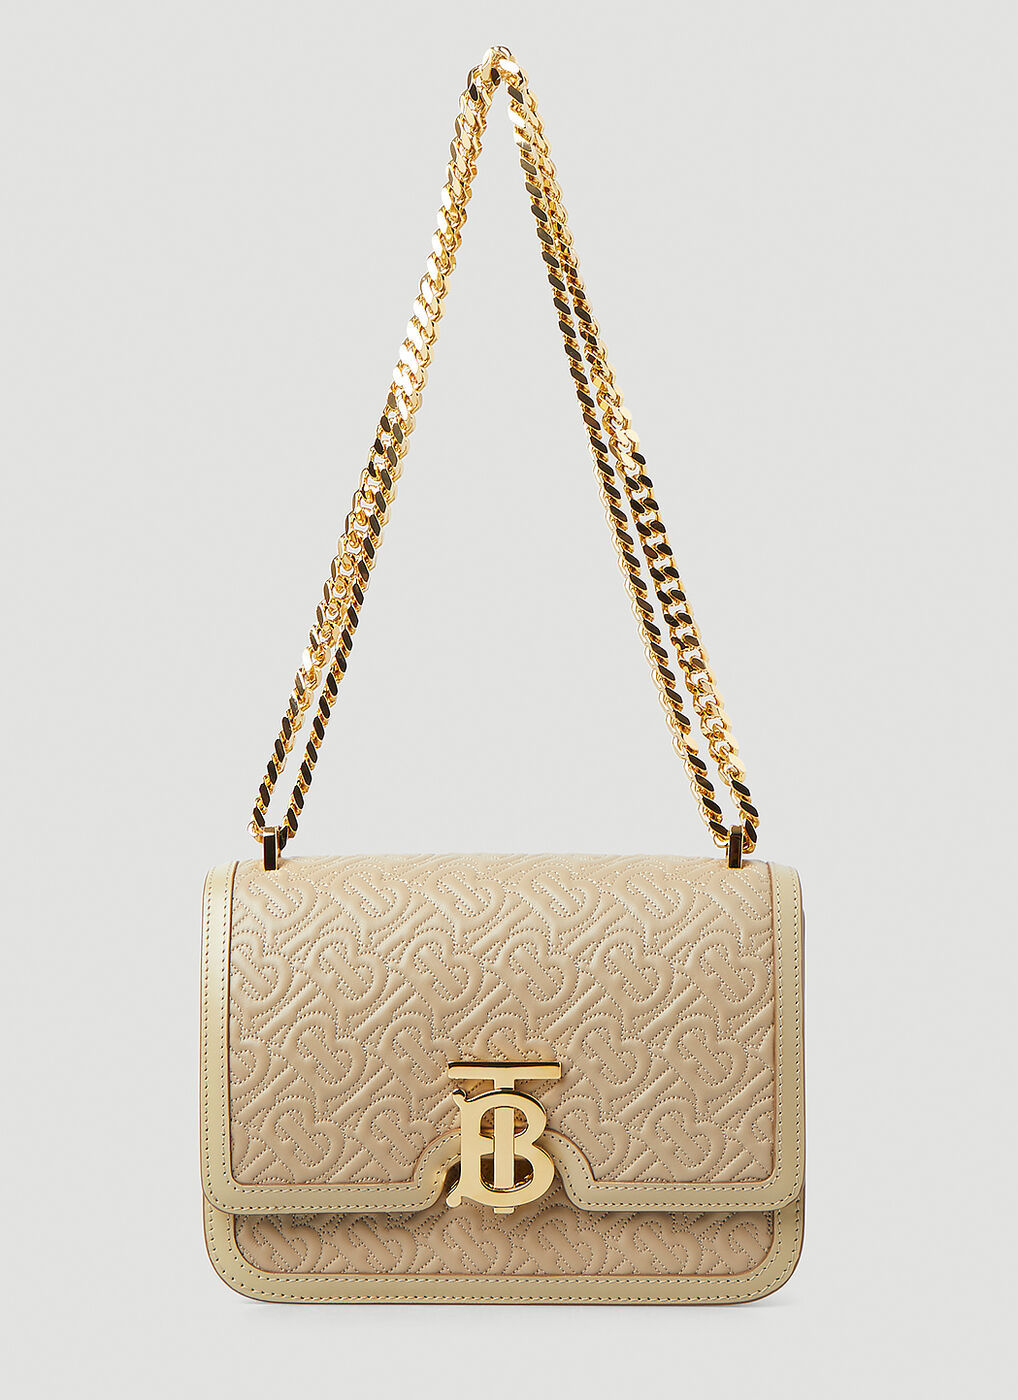 TB Monogram Quilted Small Shoulder Bag in Beige Burberry